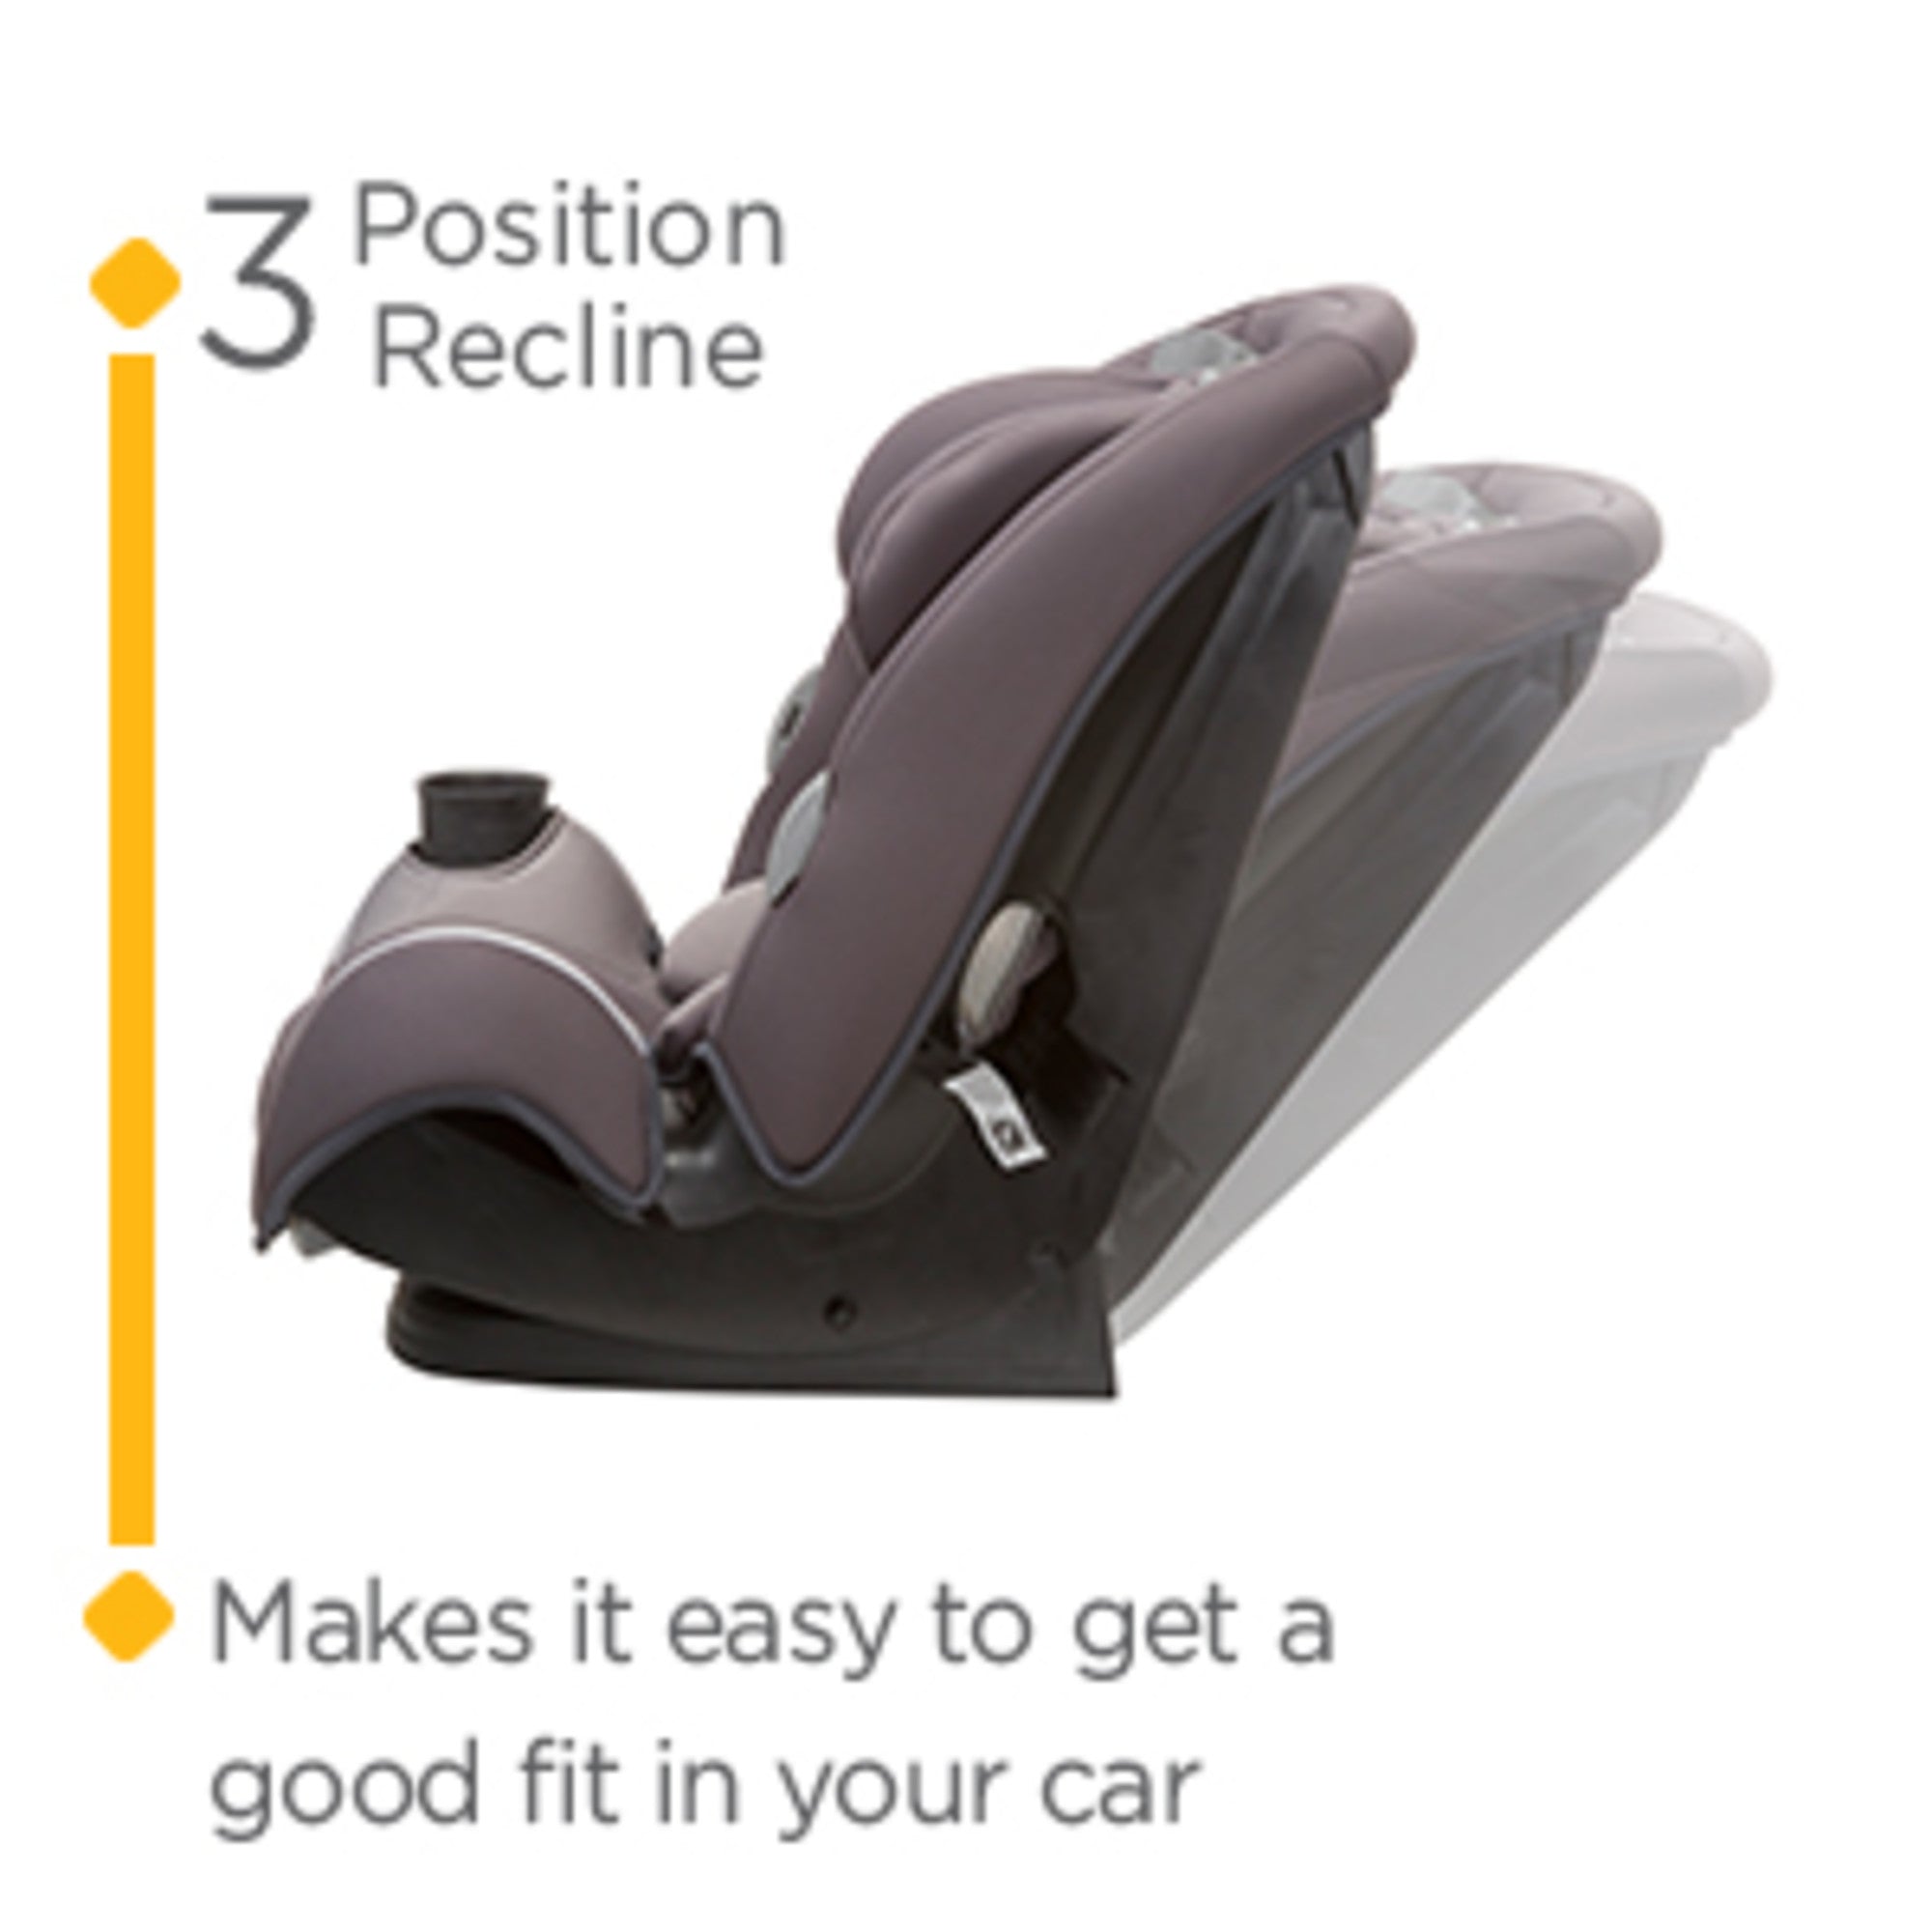 Car seat with 3 position recline. Makes it easy to get a good fit in your car.